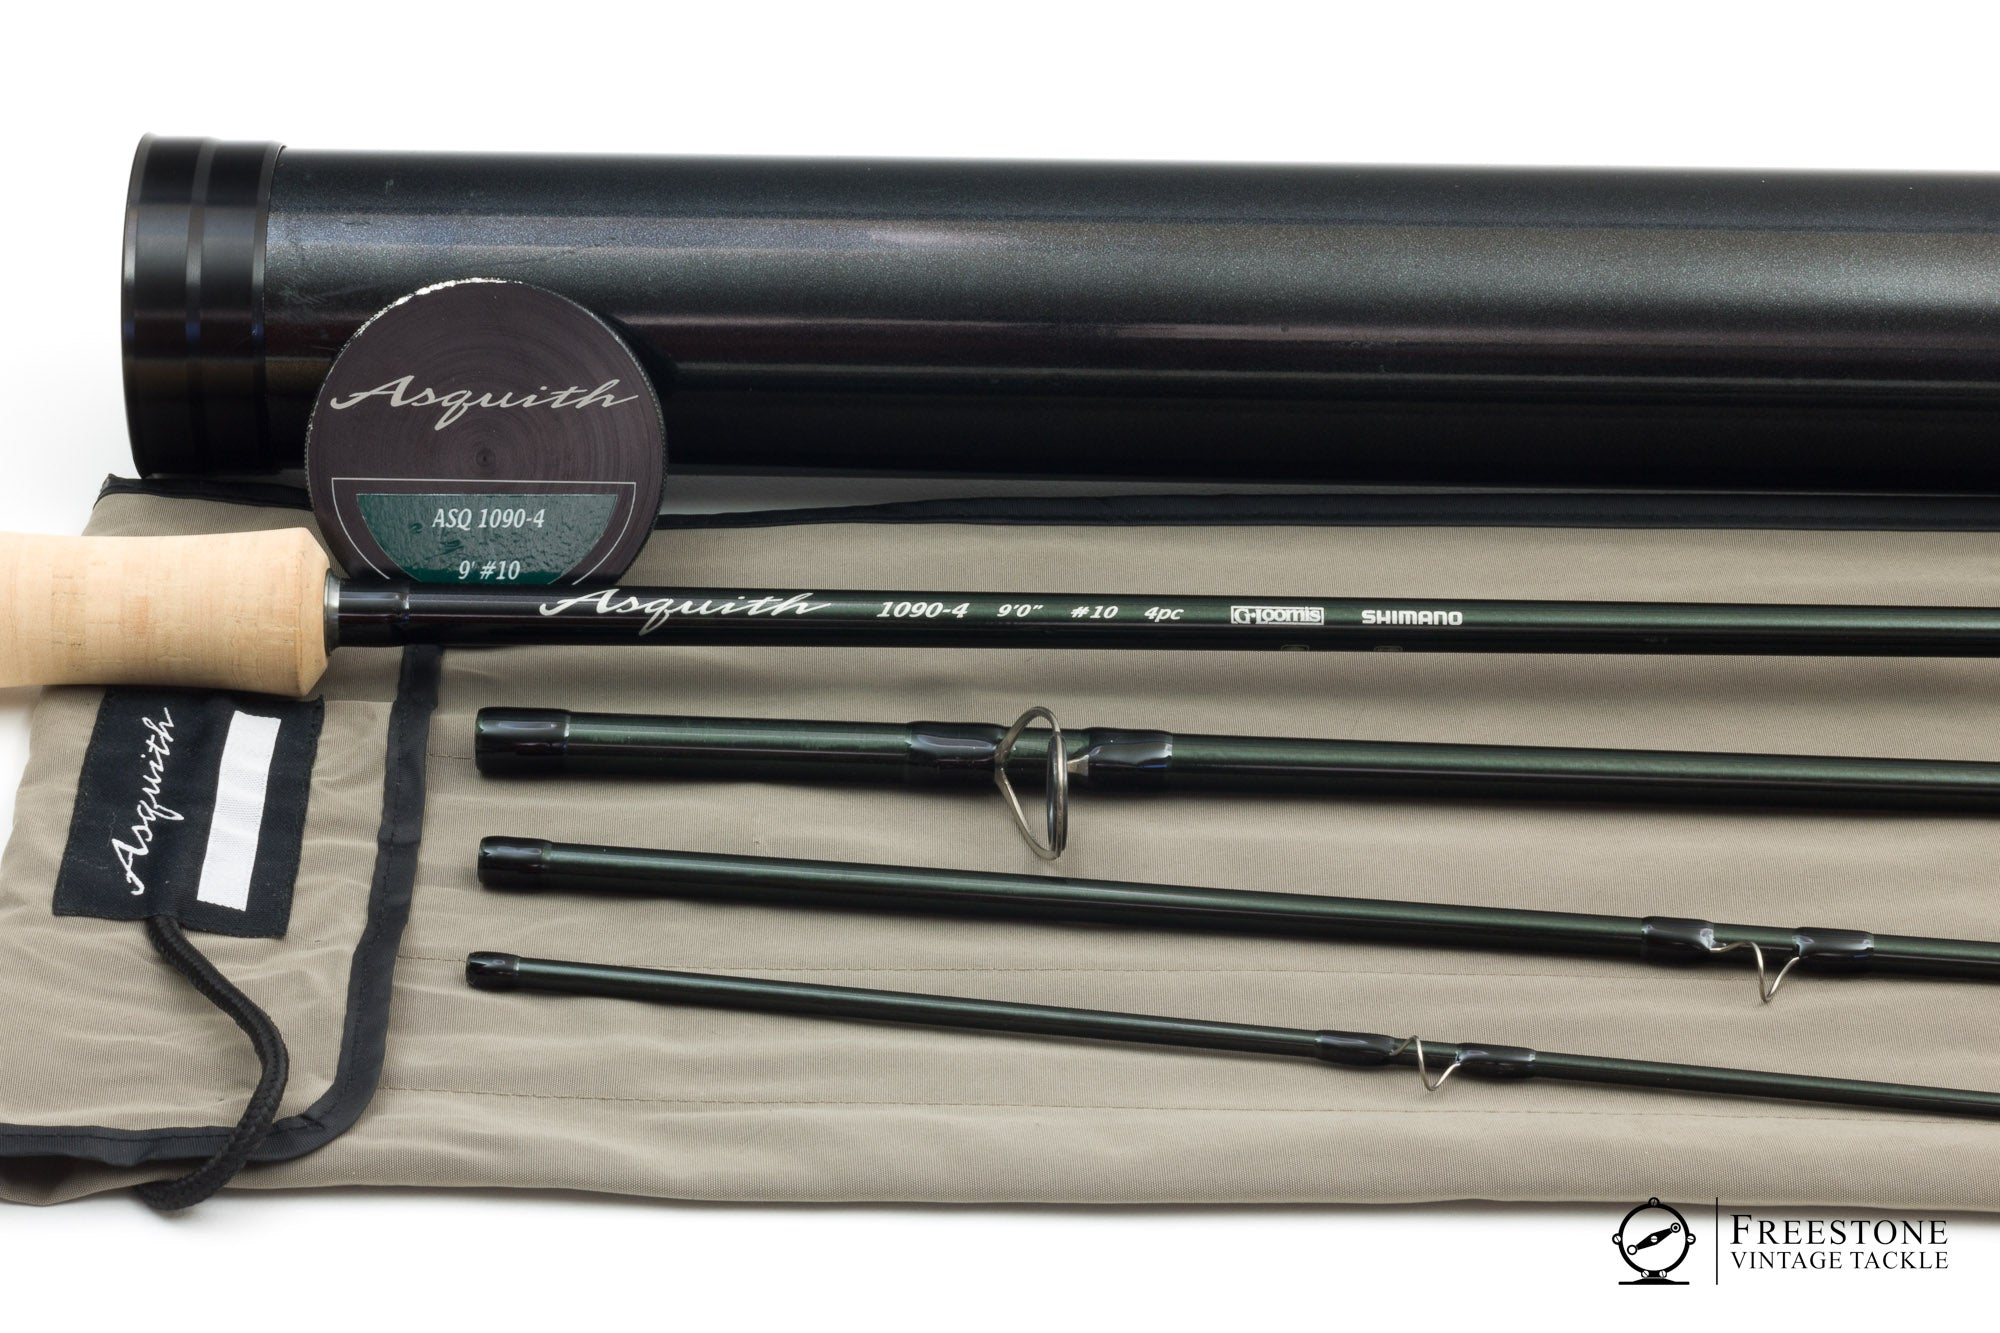 G. Loomis - Asquith 9' 4pc 10wt Graphite Rod - Freestone Vintage Tackle